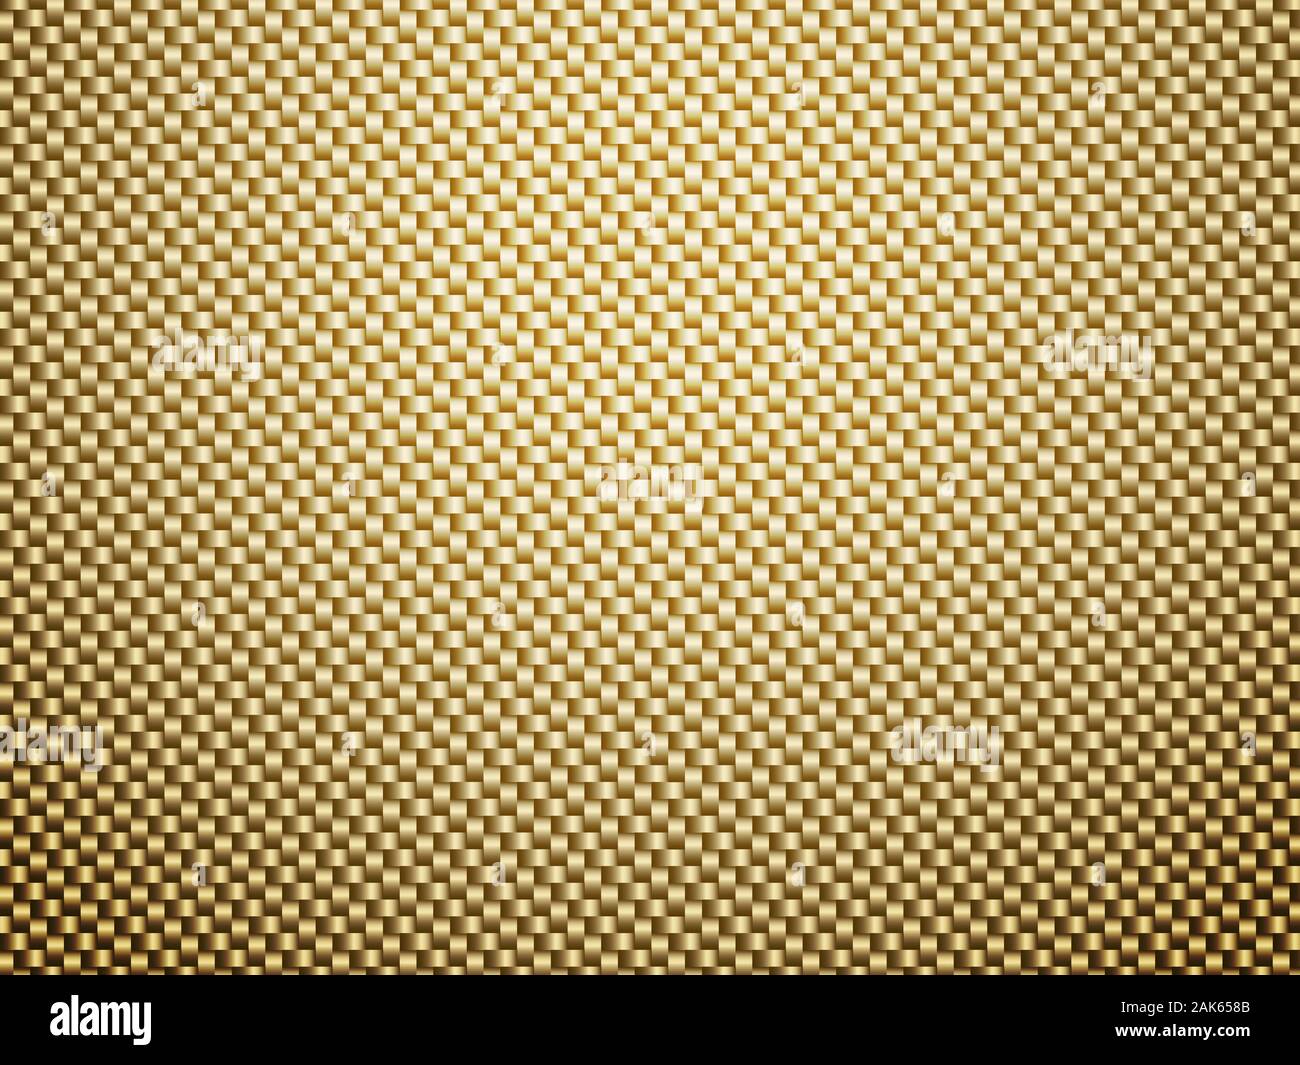 Vector golden carbon fiber volume background. Abstract decoration cloth material wallpaper with shadow for car tuning or service. Stock Vector